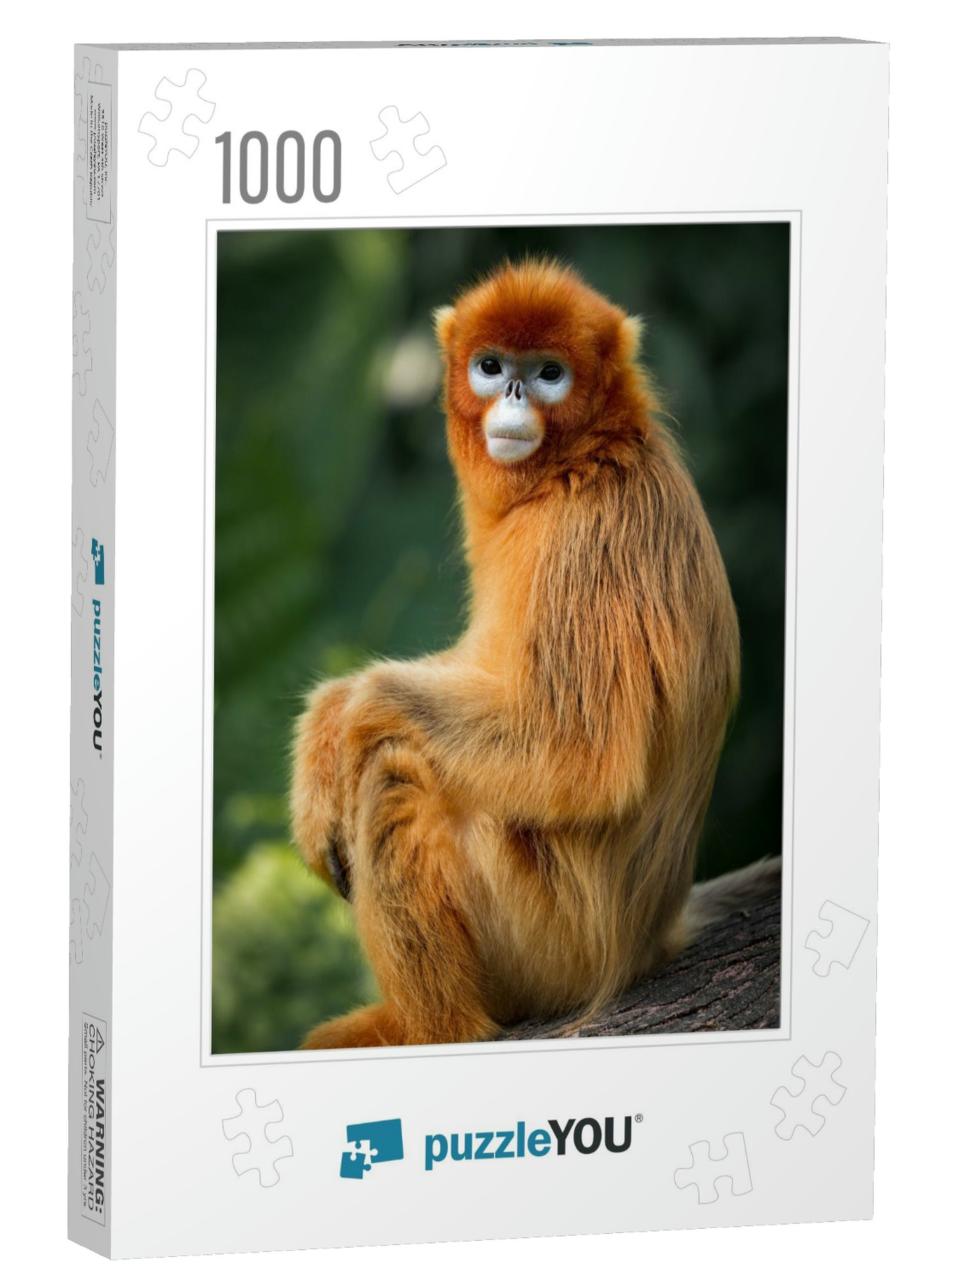 The Snub Nosed Monkey Portrait... Jigsaw Puzzle with 1000 pieces